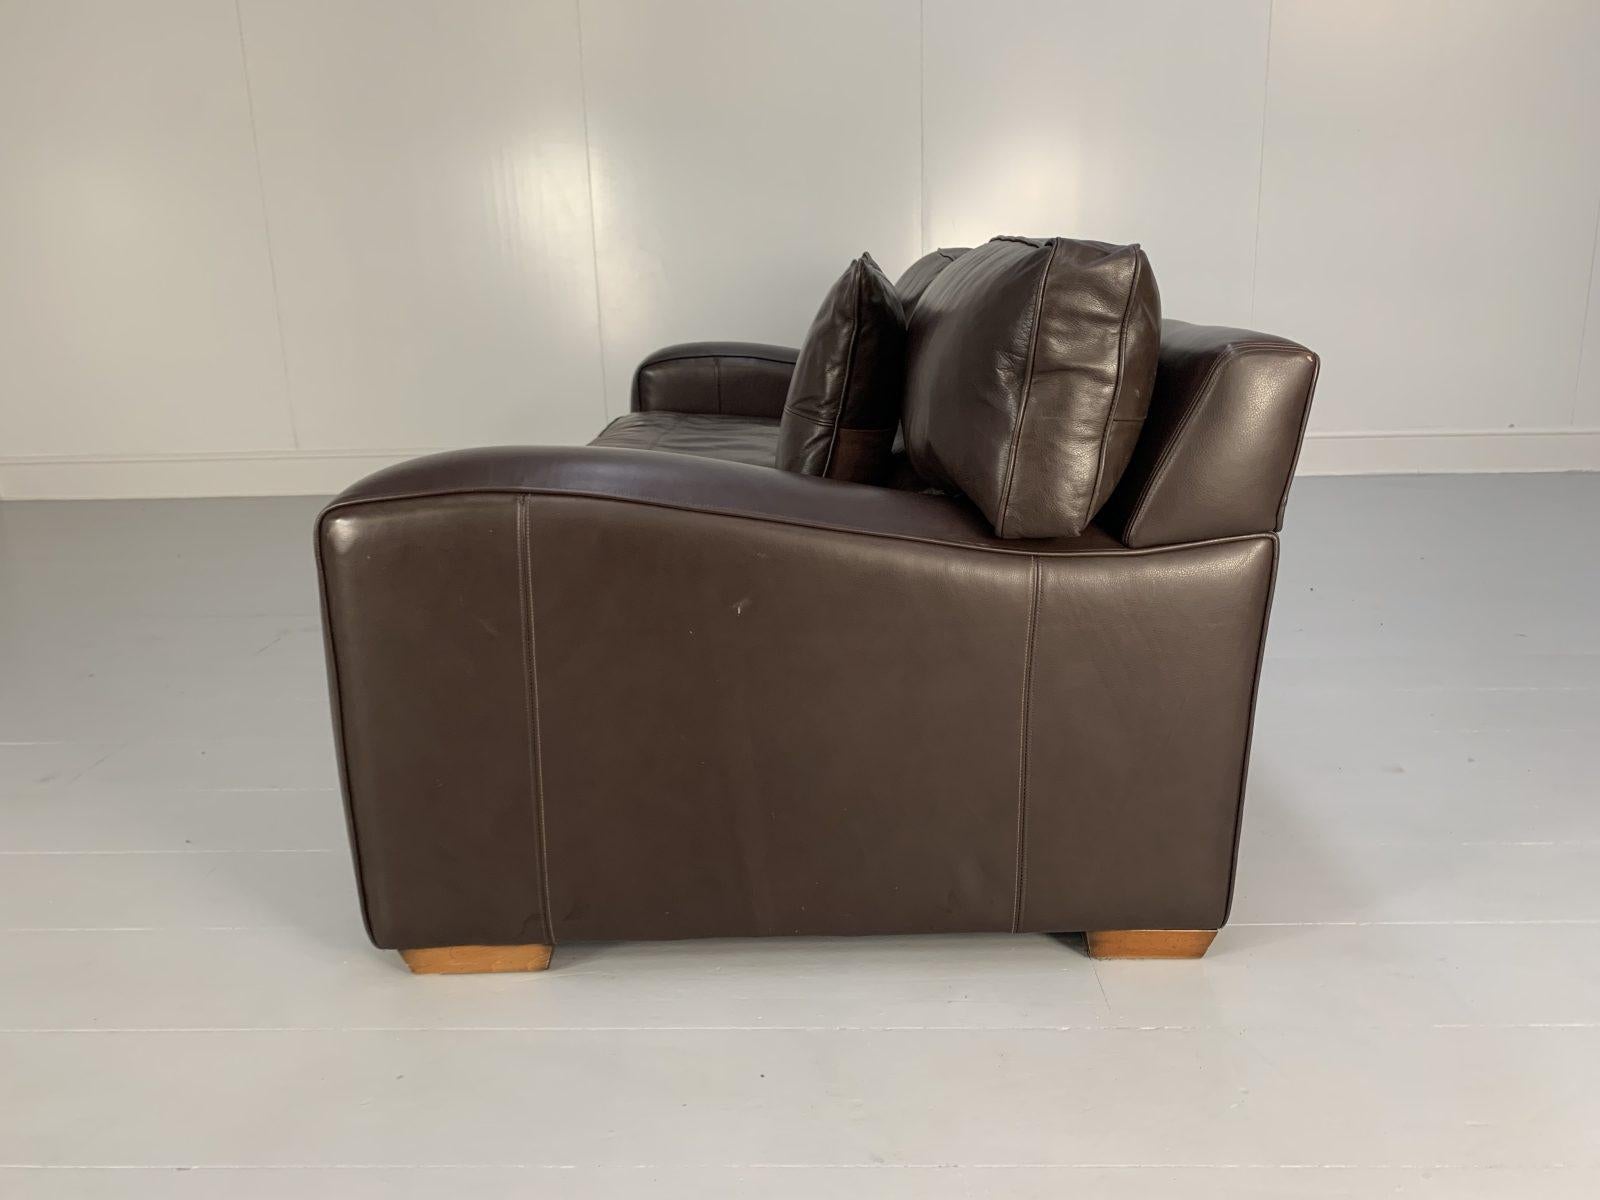 Faux Leather Duresta “Panther” Grand 3-Seat Sofa, in Dark Brown Leather For Sale